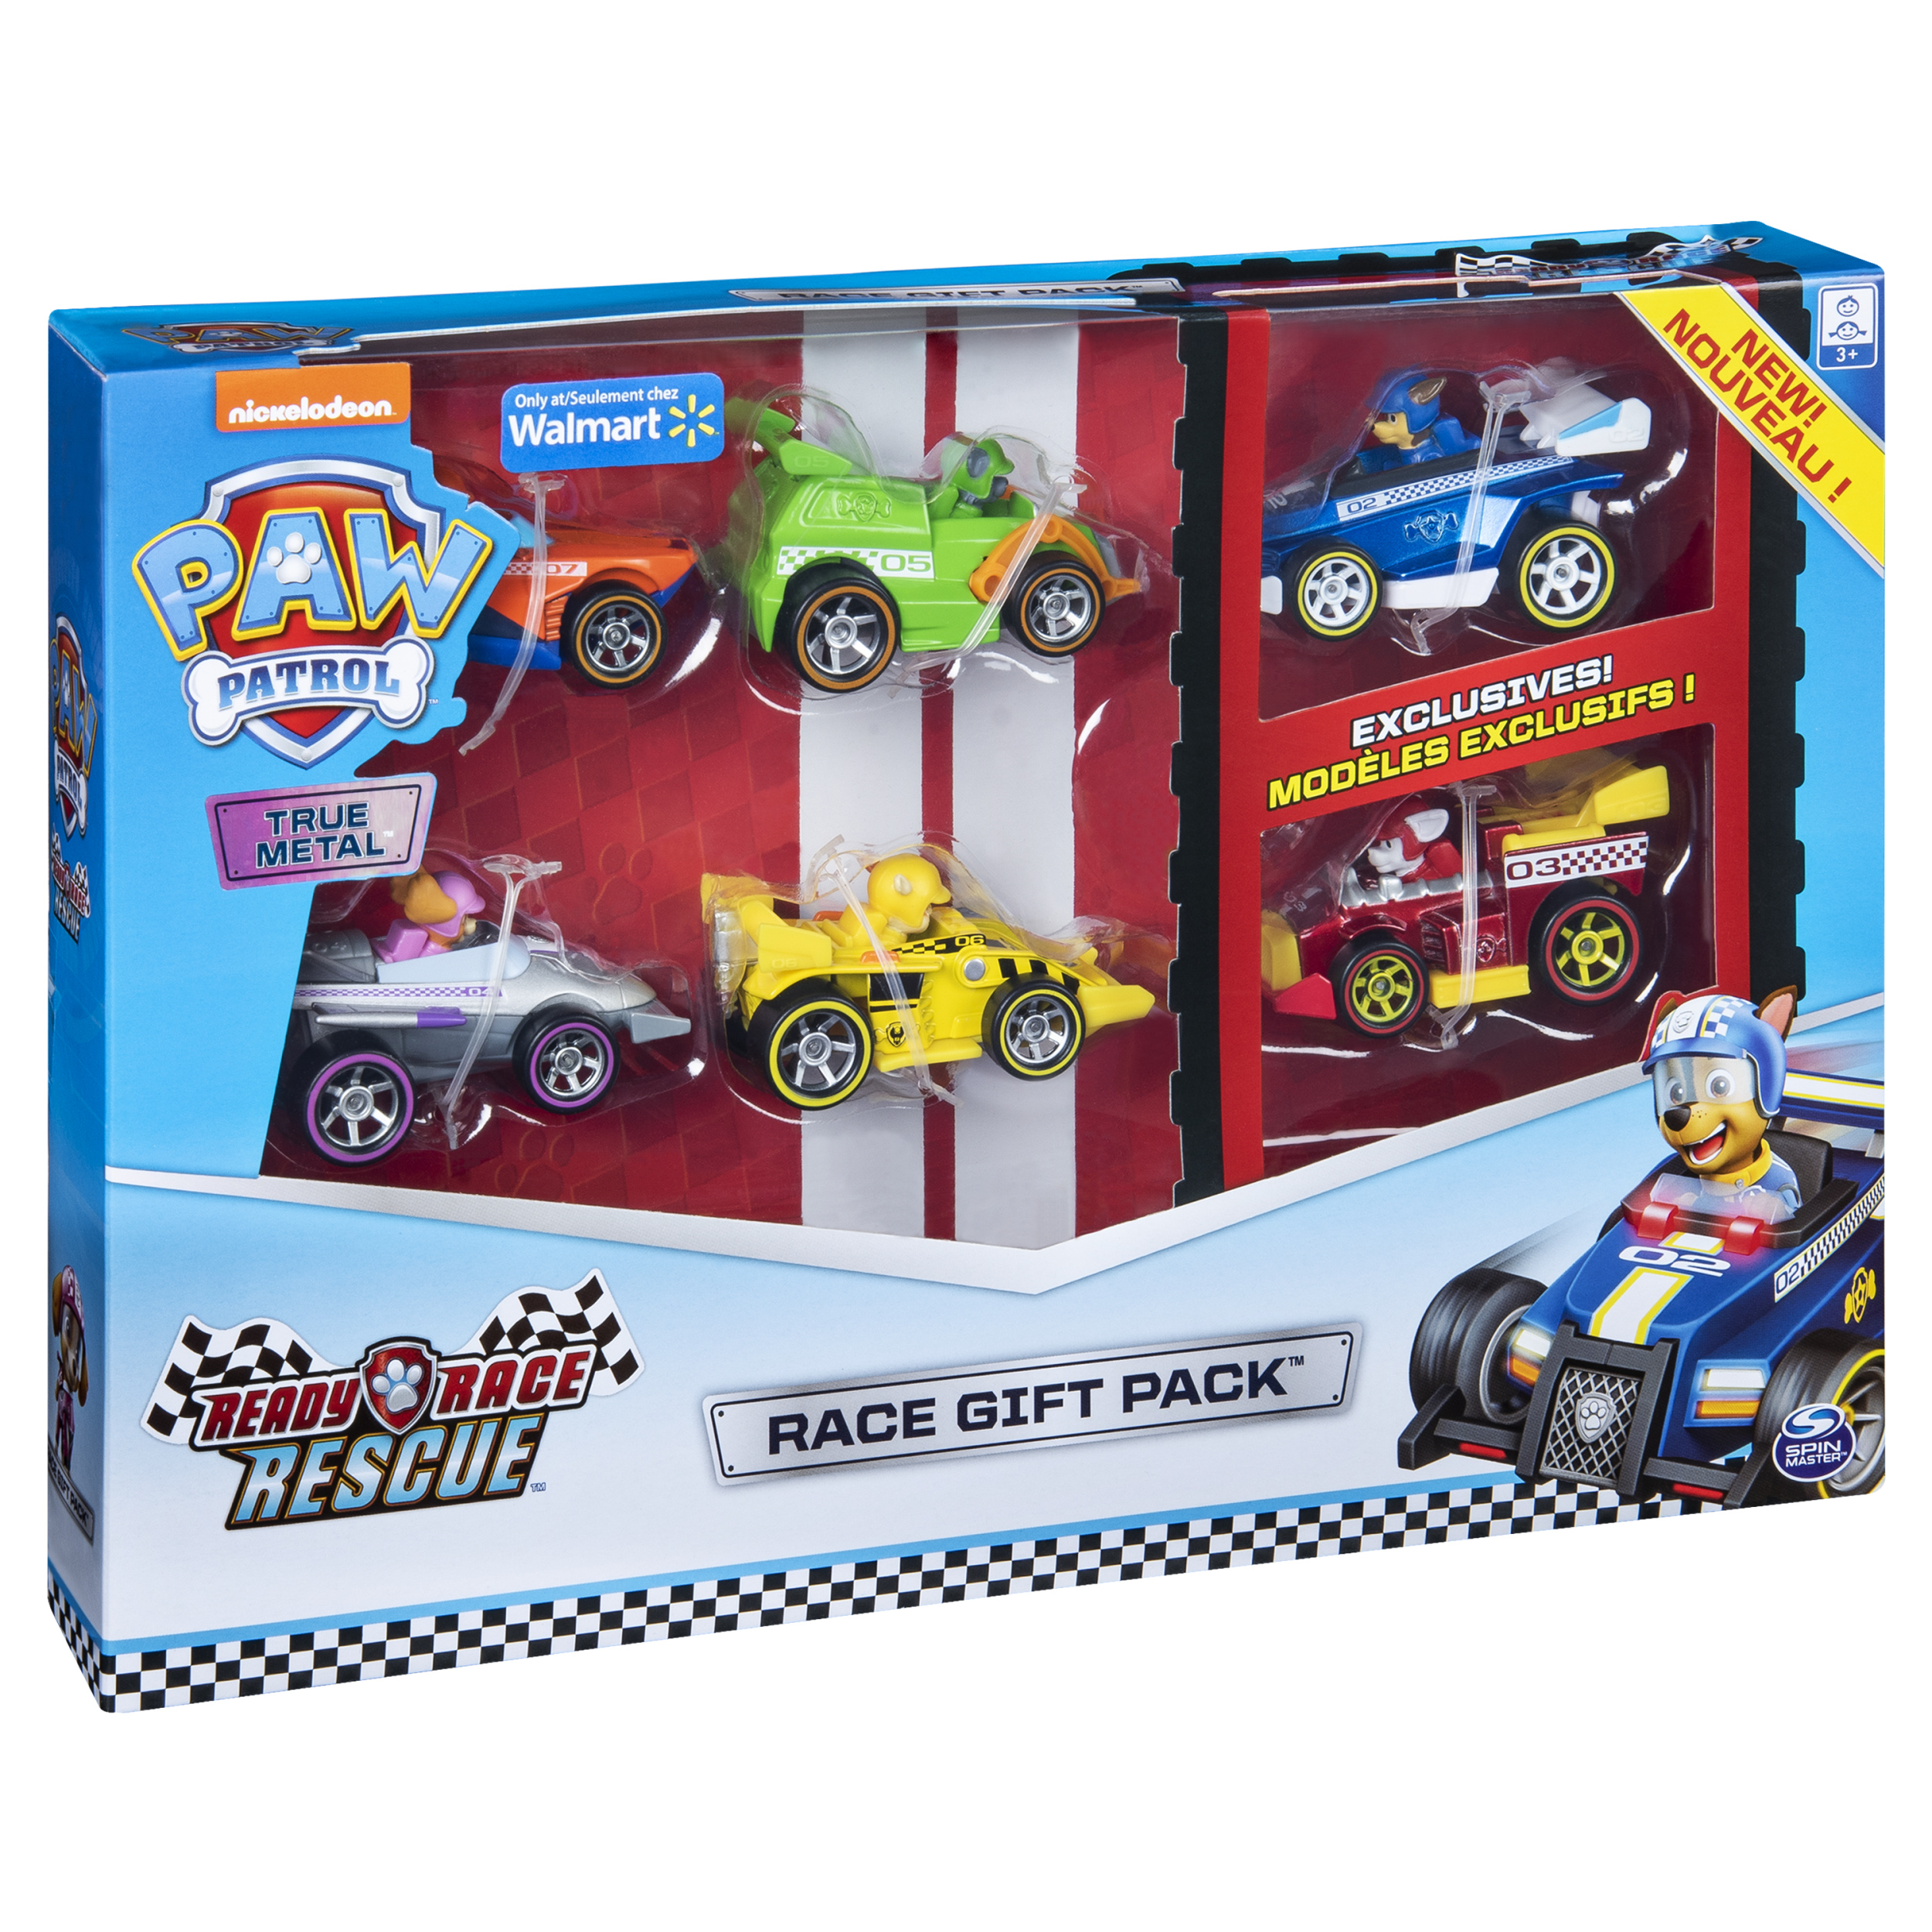 PAW Patrol, True Metal Ready Race Rescue Gift Pack of 6 Race Car Collectible Die-Cast Vehicles, 1:55 Scale - image 5 of 5